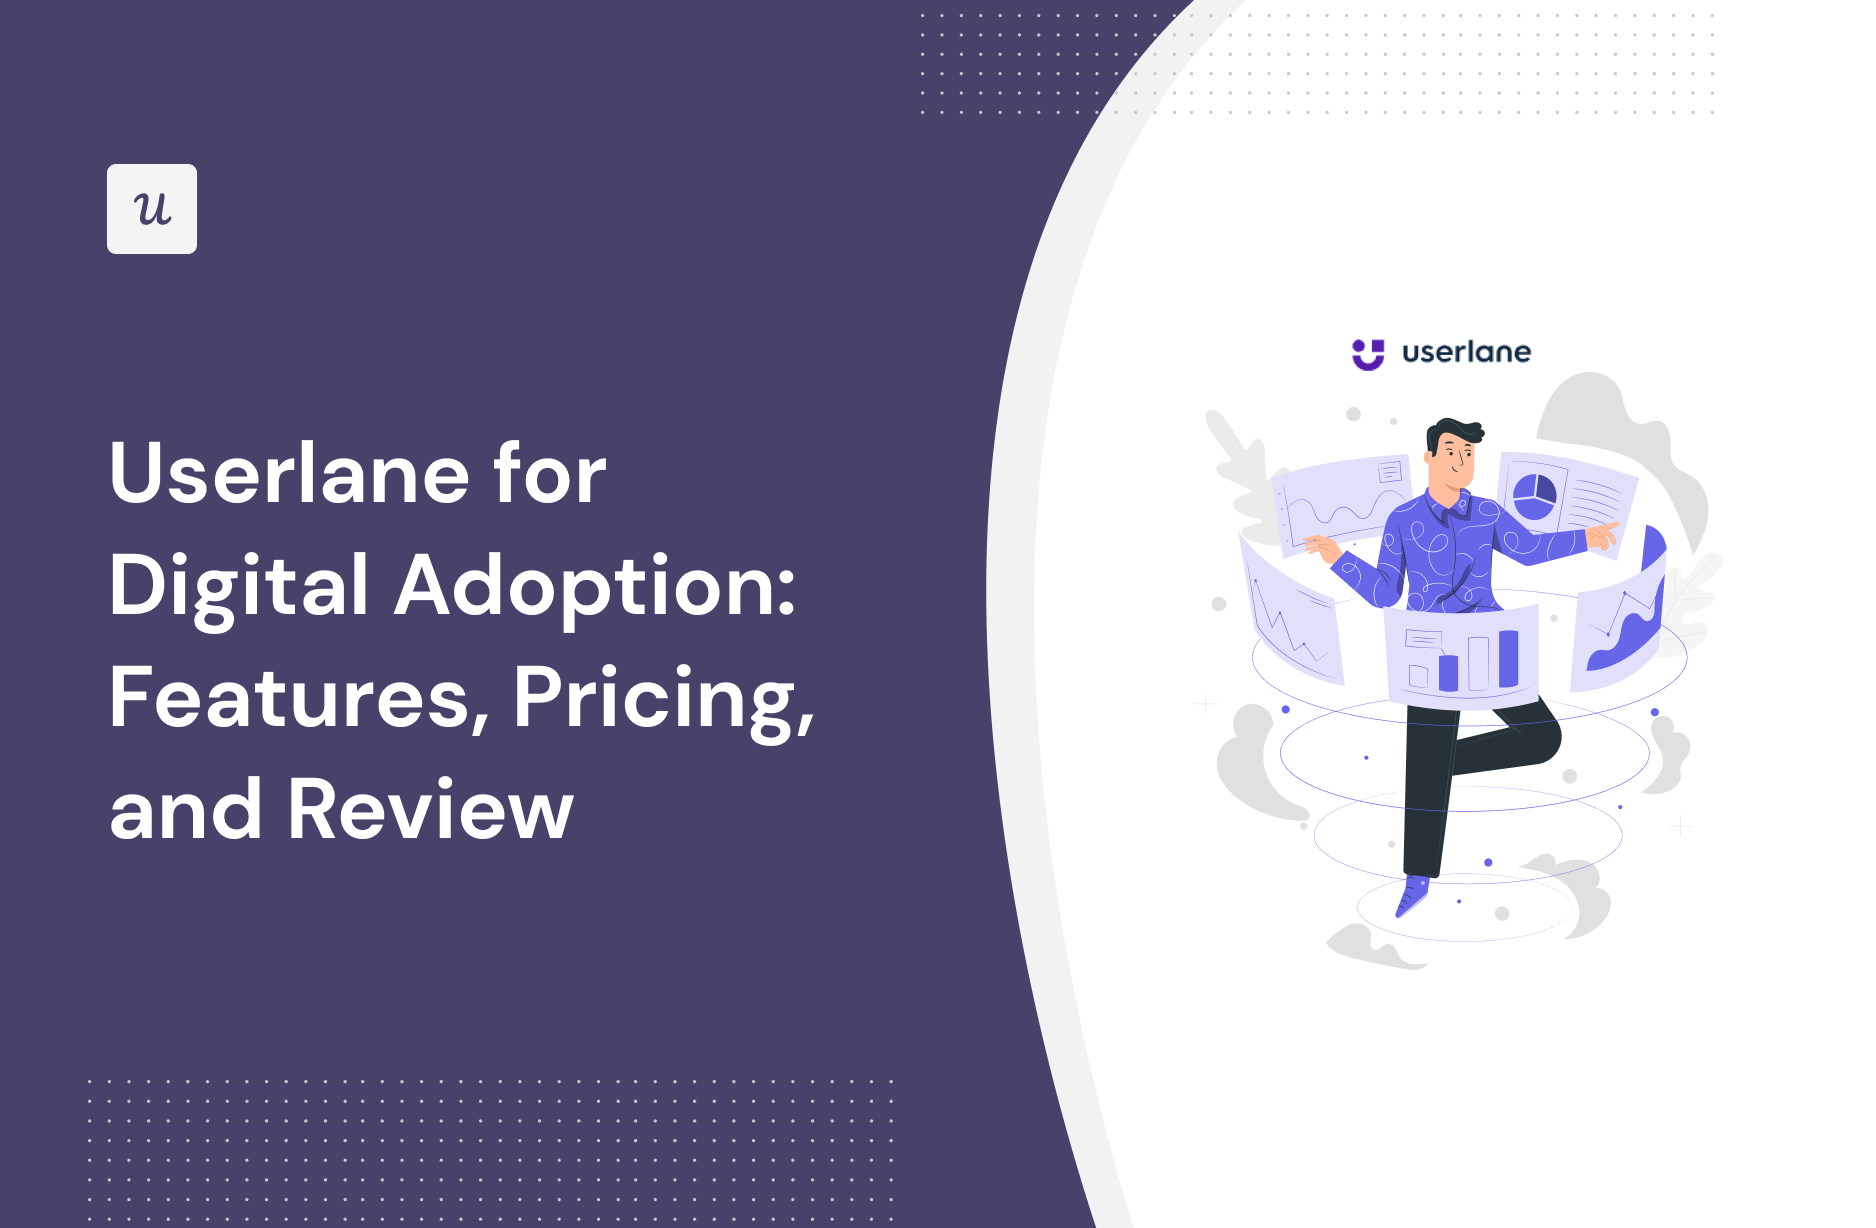 Userlane for Digital Adoption: Features, Pricing, and Review